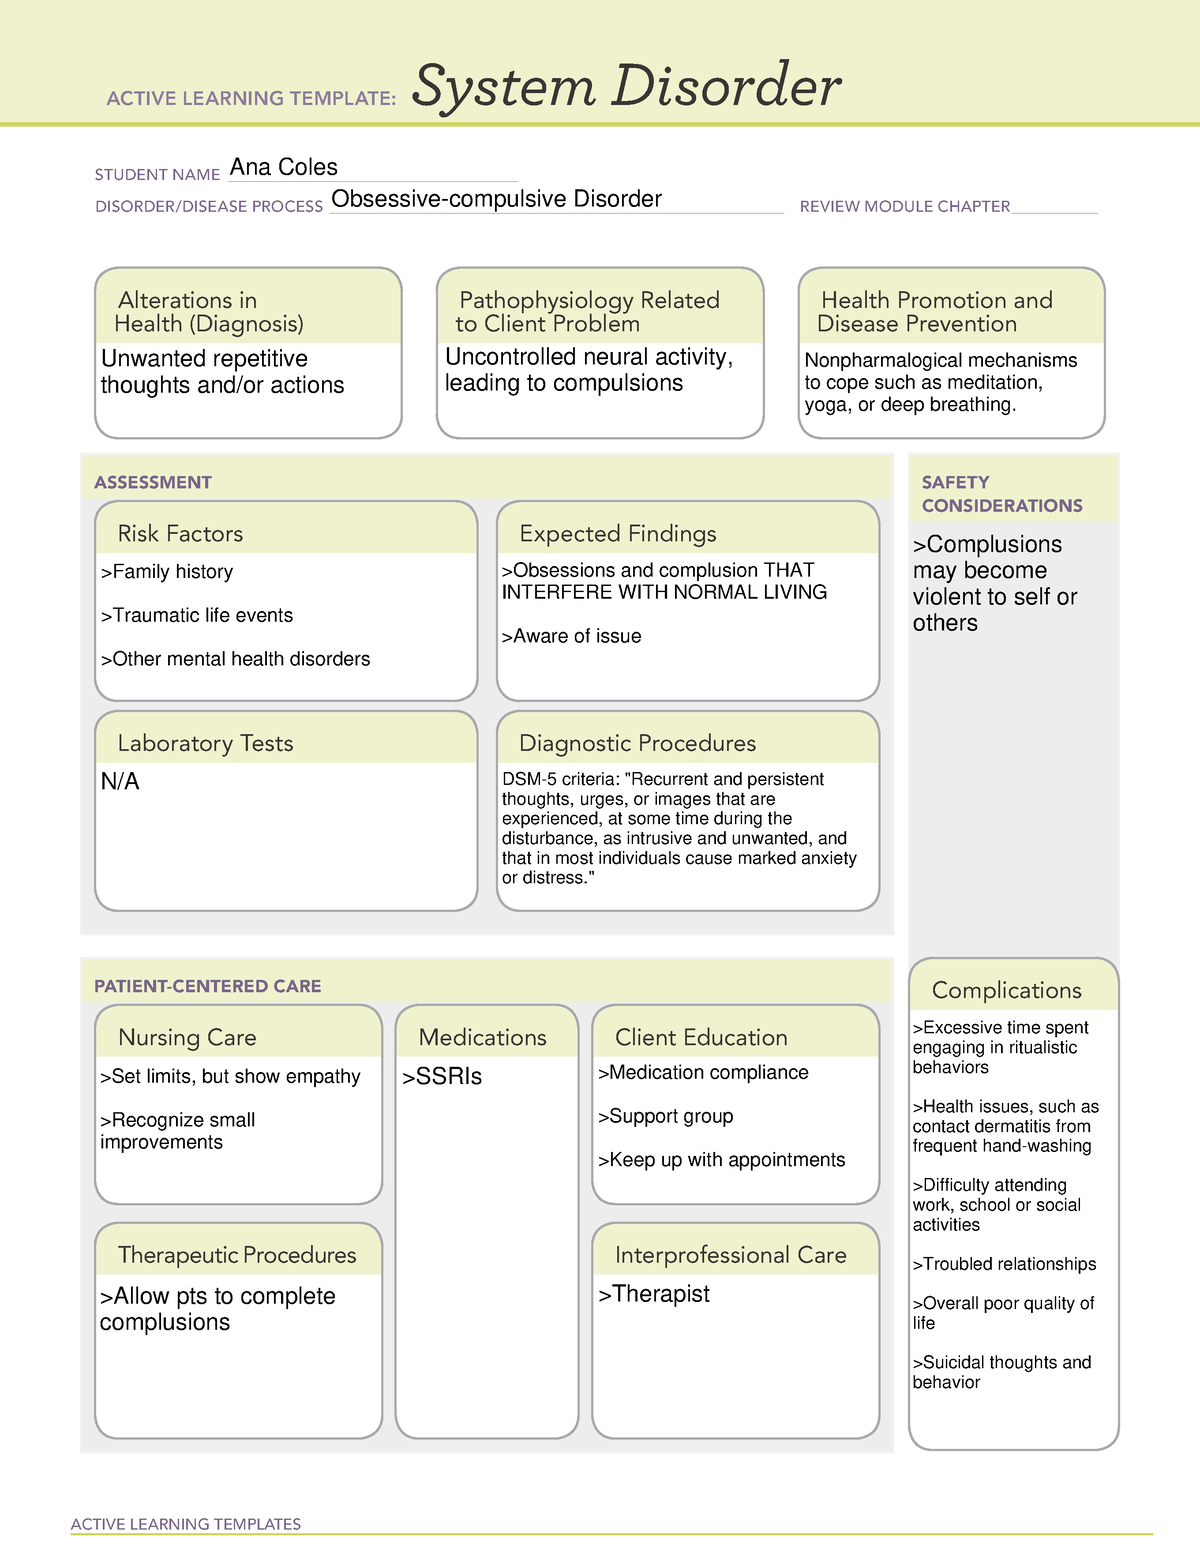 system-disorder-ocd-ocd-study-sheet-active-learning-templates